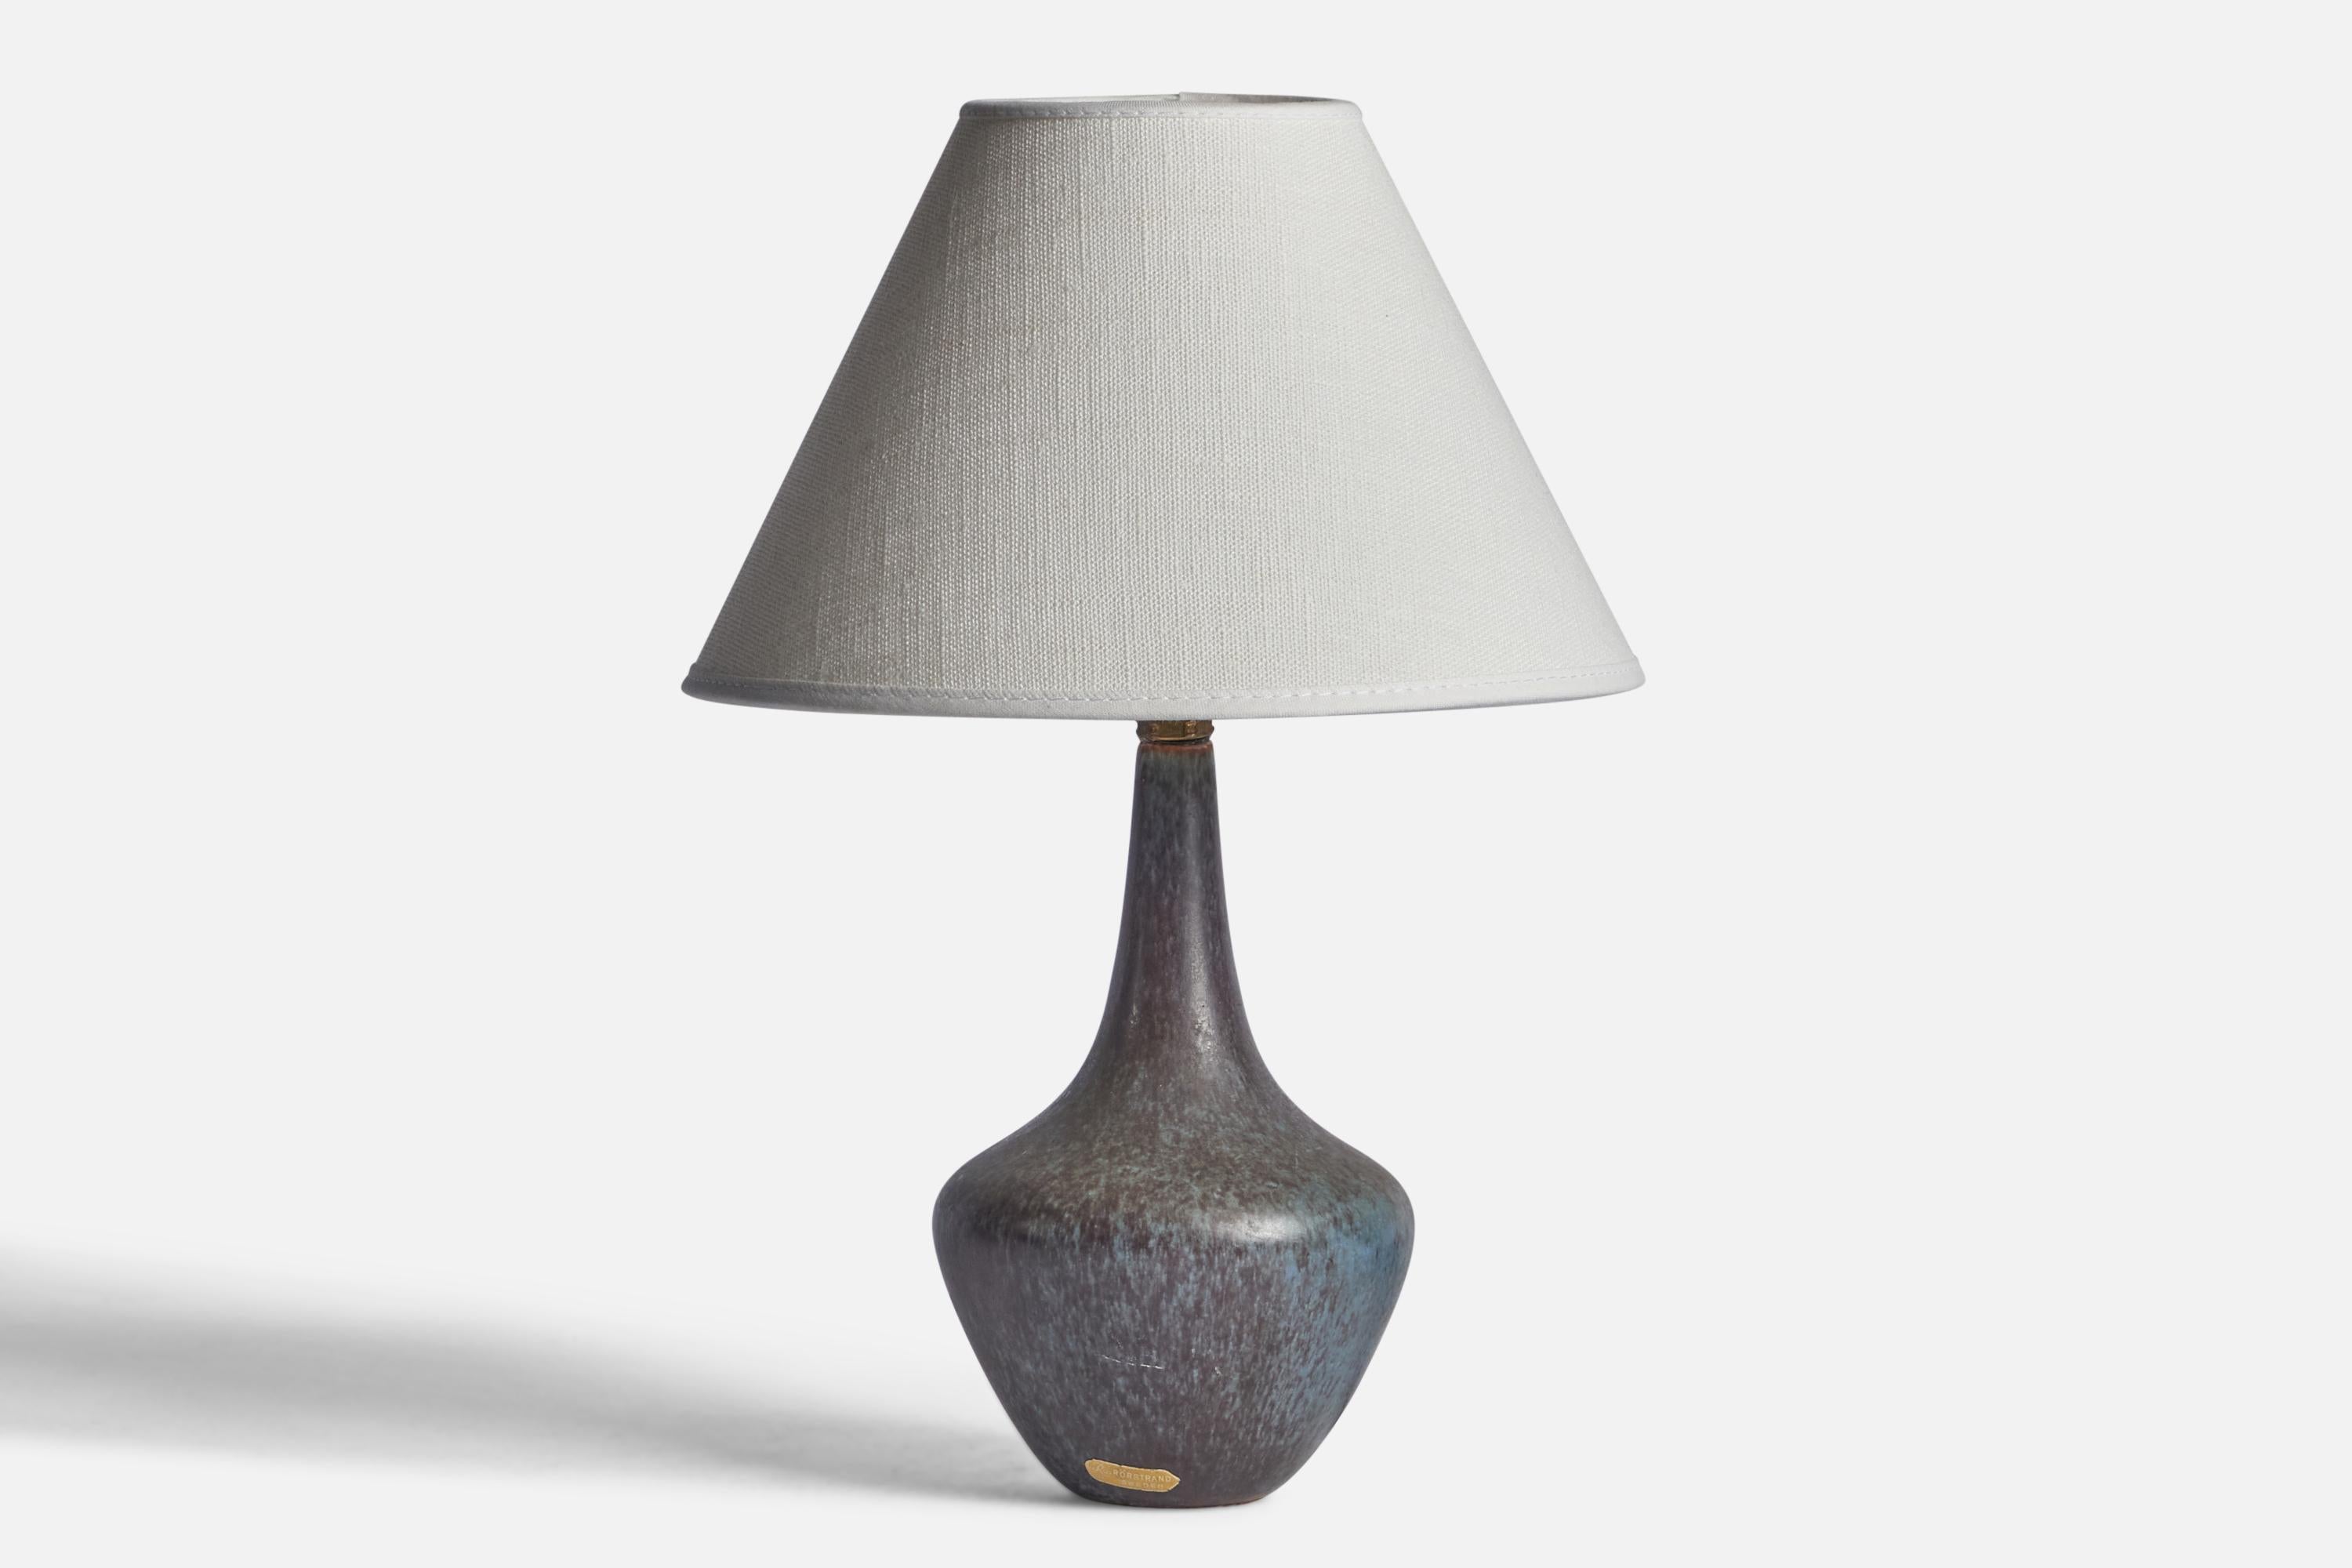 A blue-glazed stoneware table lamp designed by Gunnar Nylund and produced by Rörstrand, Sweden, 1940s.

Dimensions of Lamp (inches): 8.75” H x 4” Diameter
Dimensions of Shade (inches): 3” Top Diameter x 8” Bottom Diameter x 5” H 
Dimensions of Lamp